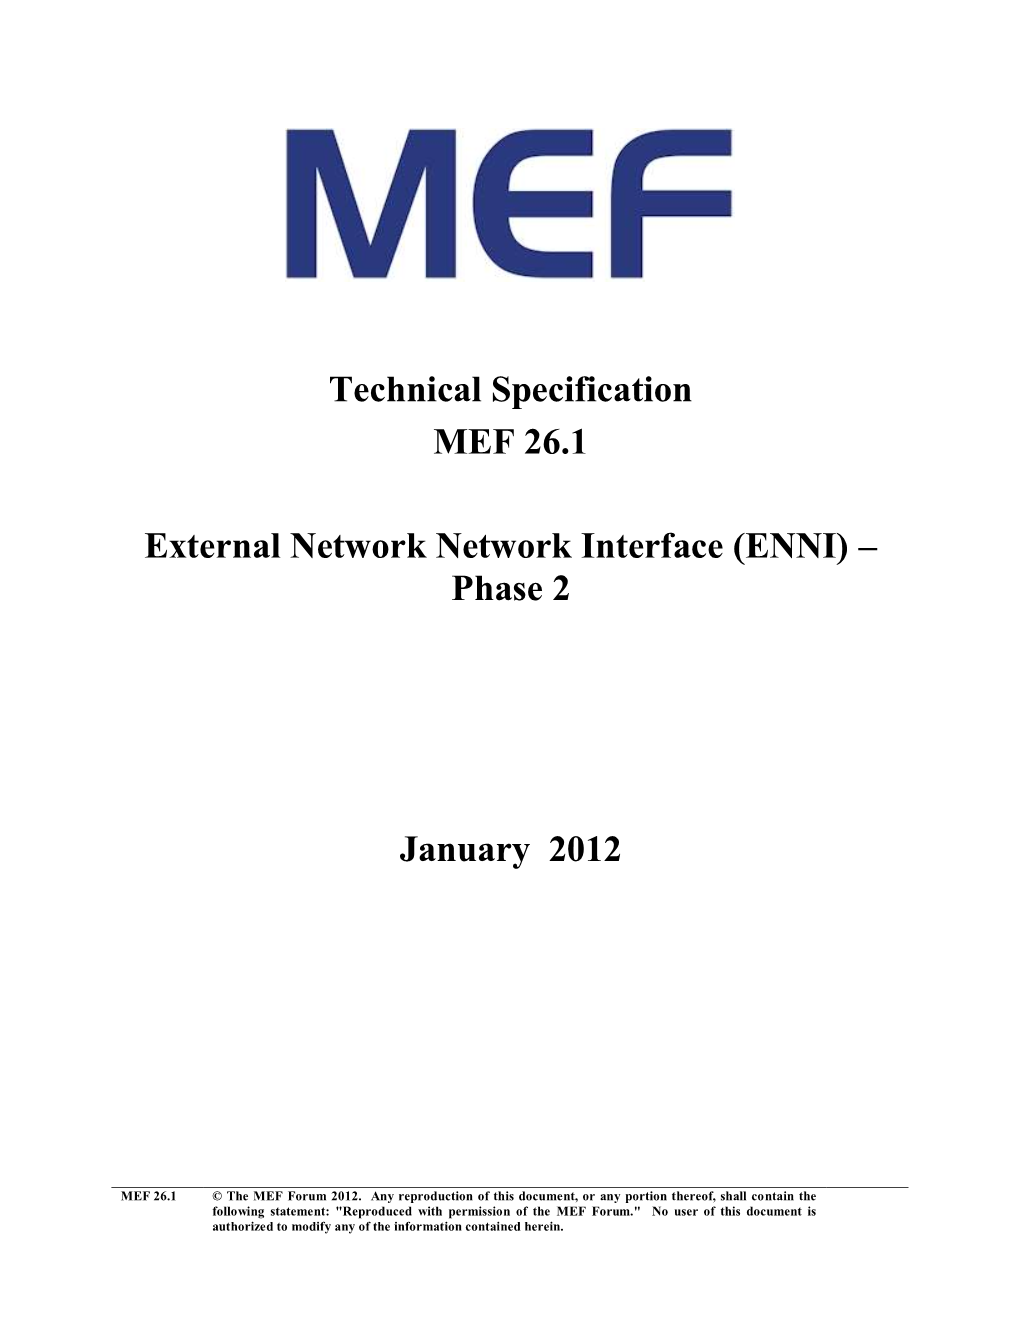 Technical Specification MEF 26.1 External Network Network Interface (ENNI) – Phase 2 January 2012